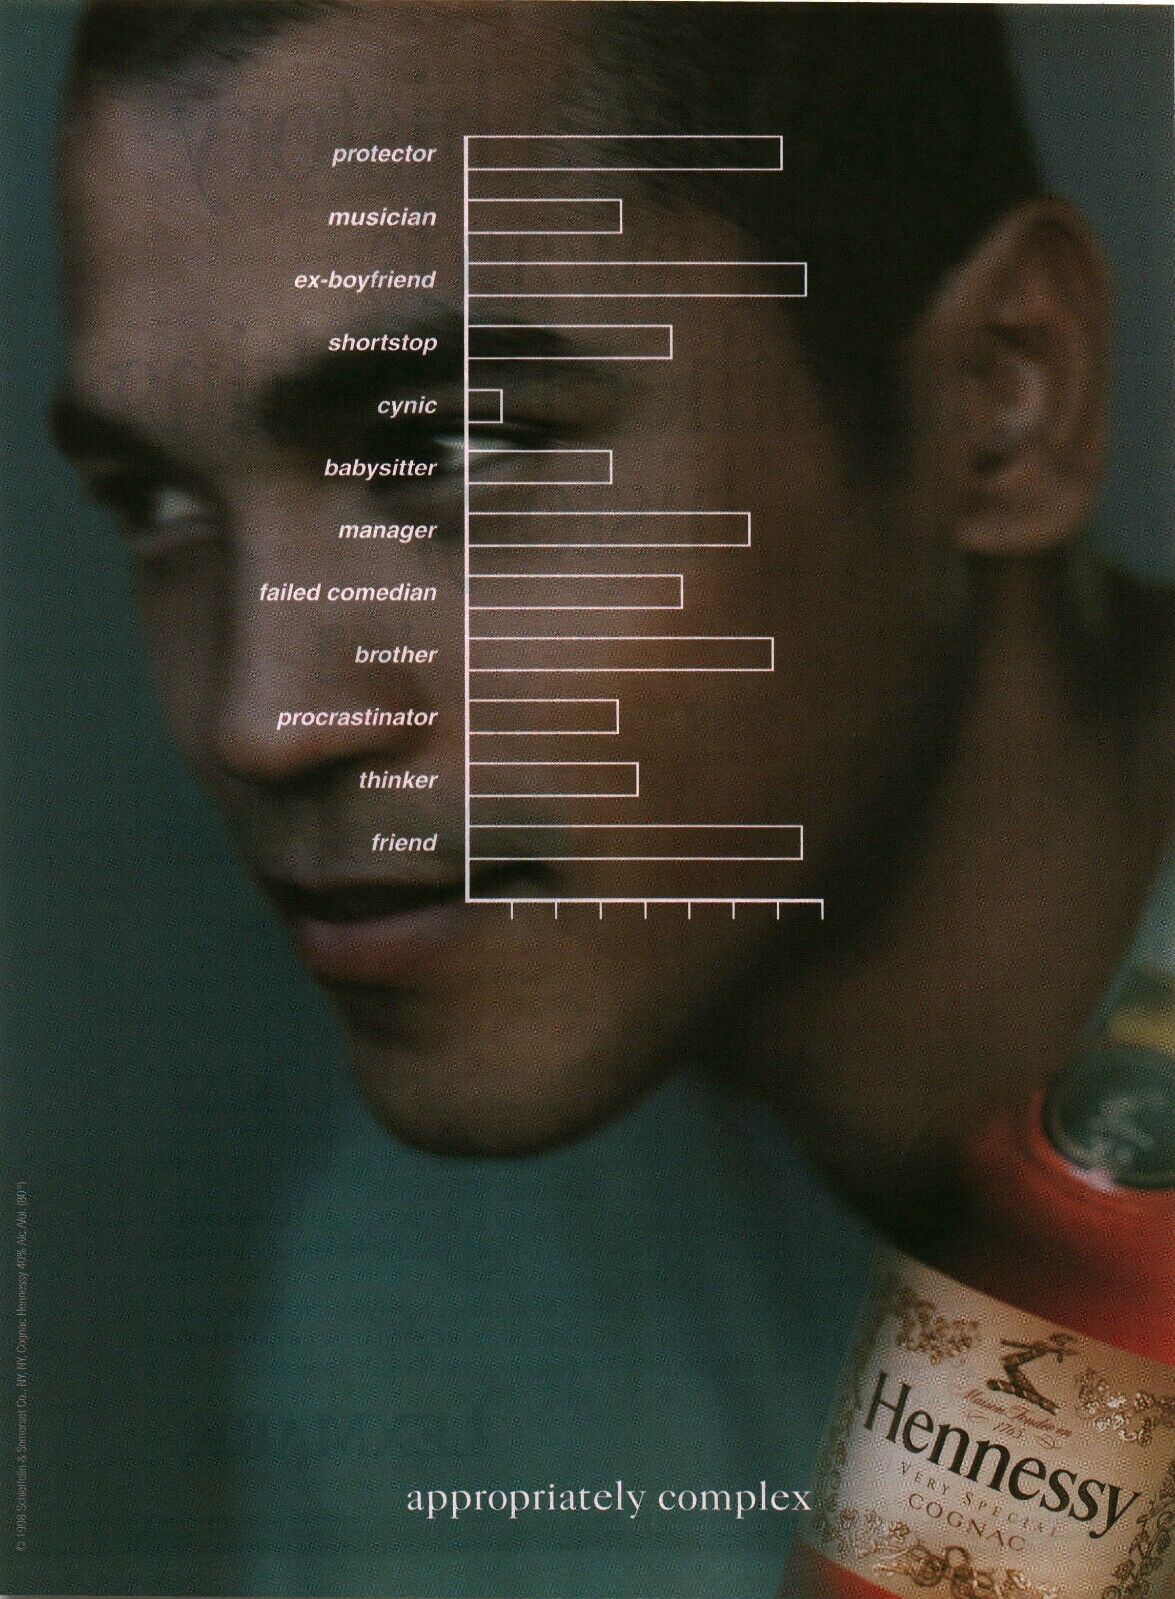 1998 VINTAGE PRINT AD - HENNESSY COGNAC AD..APPROPRIATELY COMPLEX - PROTECTOR